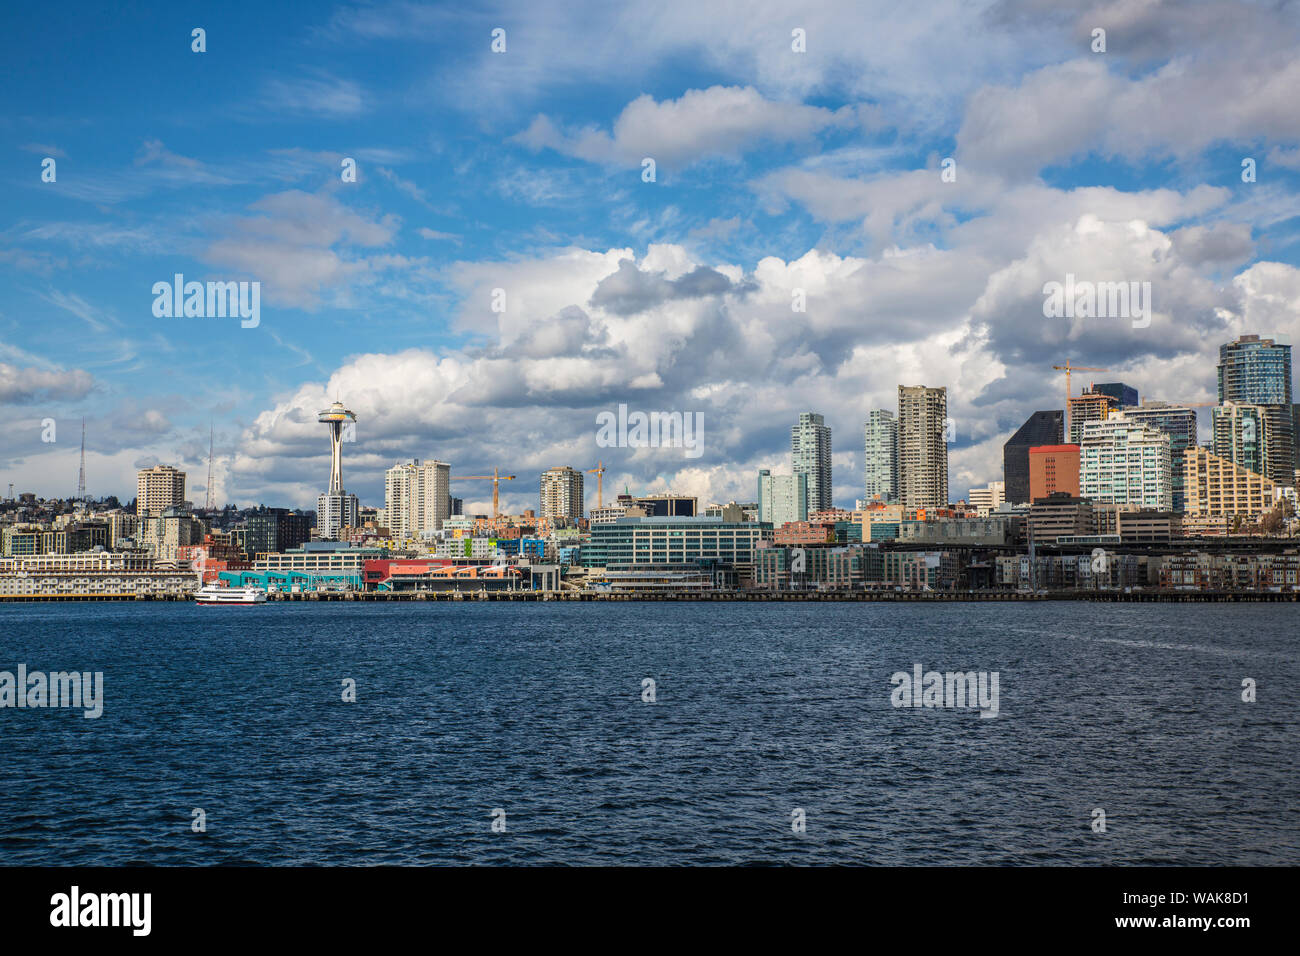 Seattle, Washington State. Space Needle, waterfront, Queen Anne Hill Banque D'Images